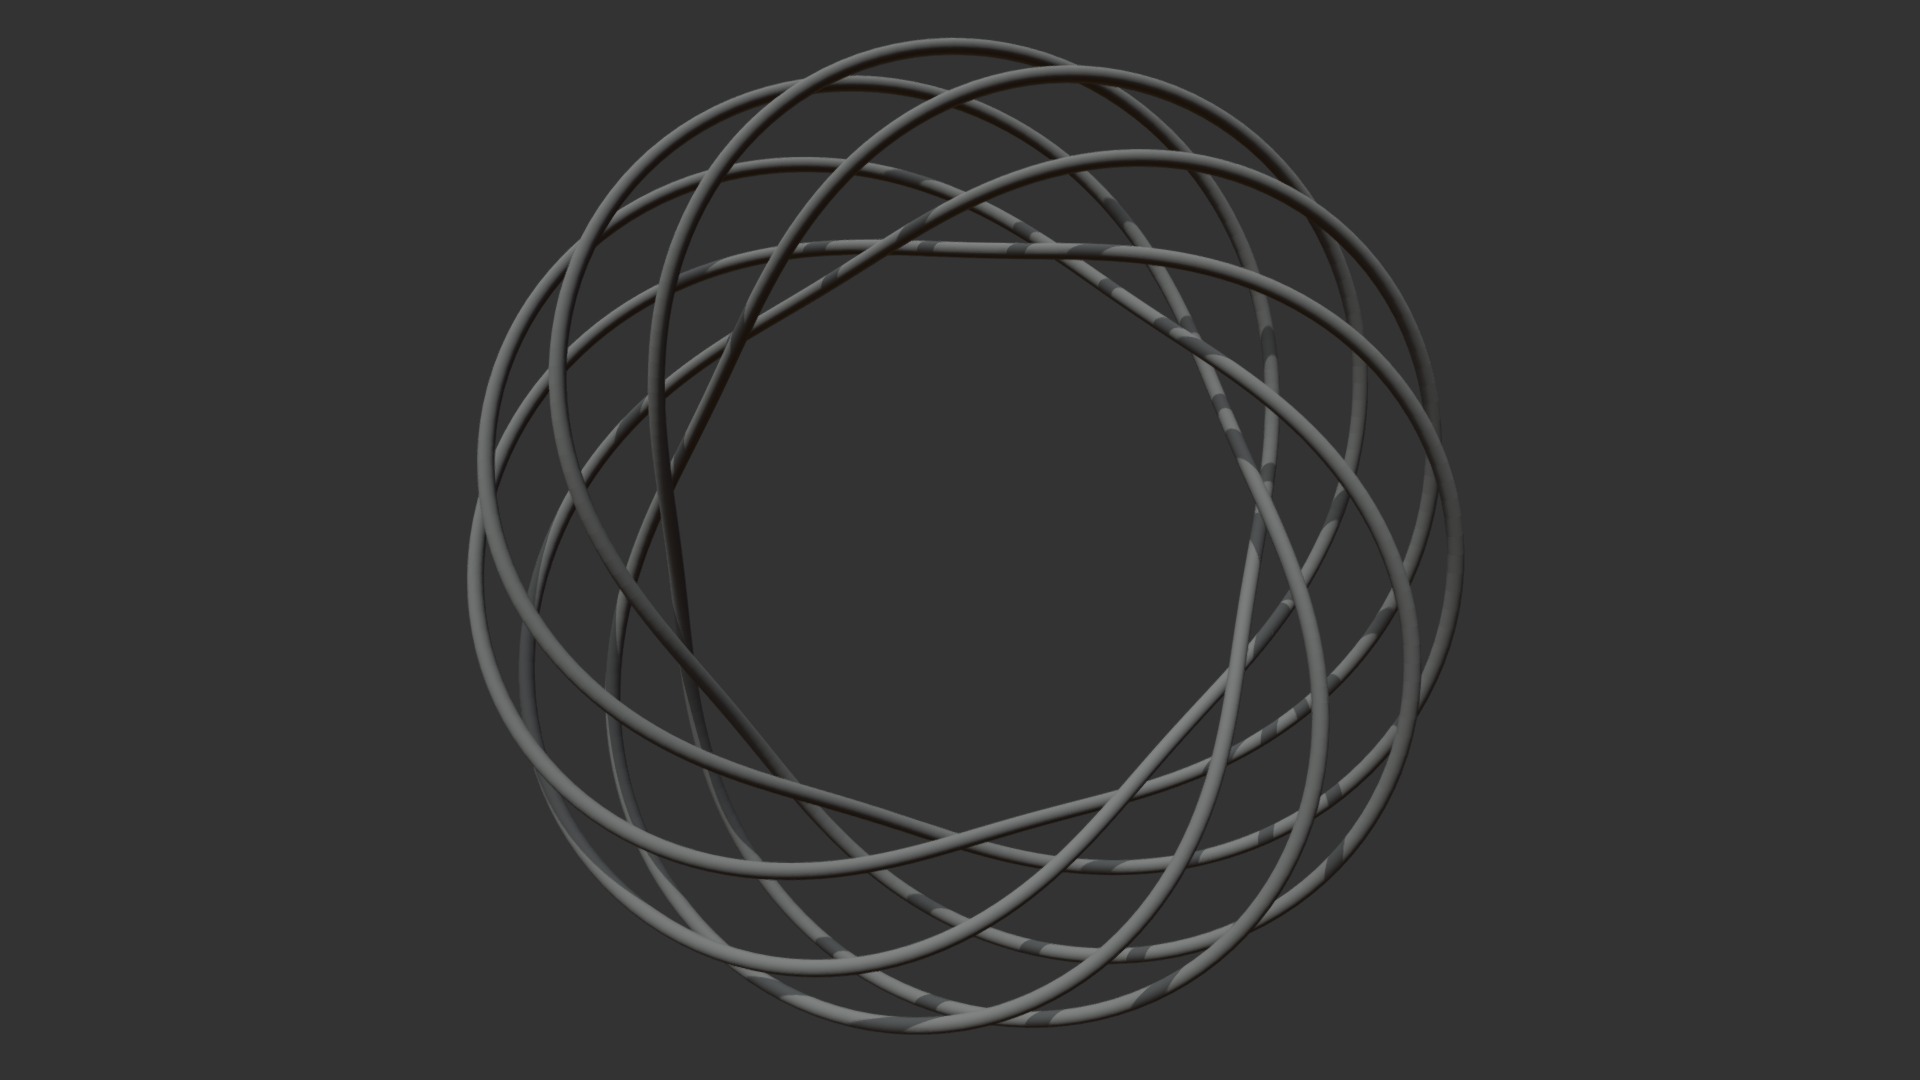 3D model Torus knot 6,11 r=0.5 - This is a 3D model of the Torus knot 6,11 r=0.5. The 3D model is about a circular object with a circle in the middle.